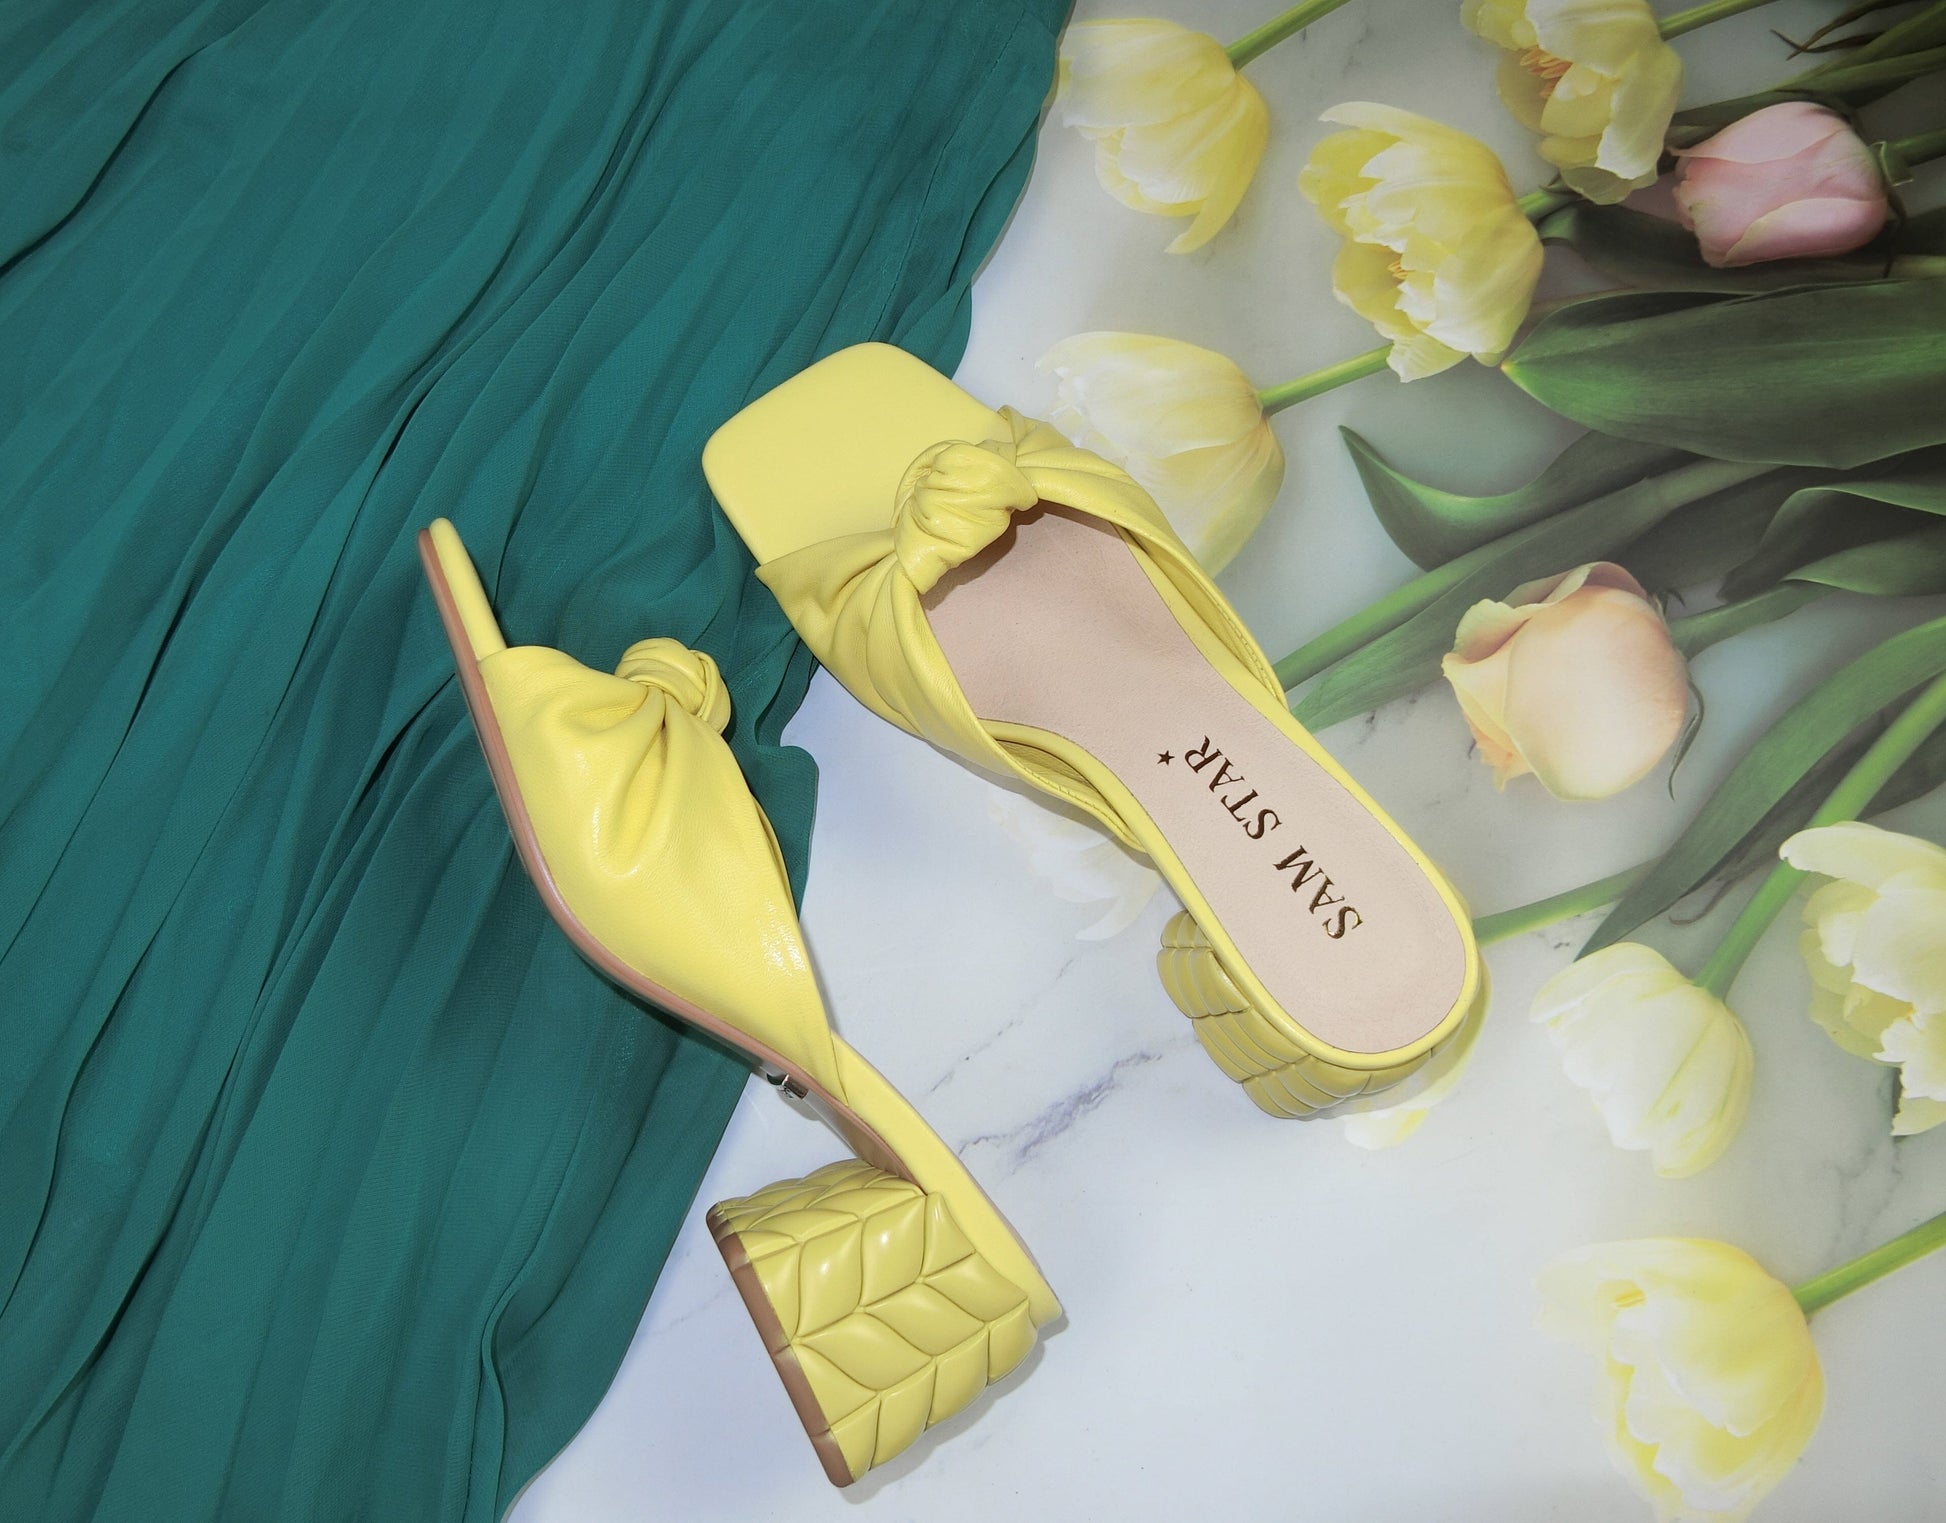 SS22014 Genuine leather bow tie block heel sandals in Yellow sandals Sam Star Shoes Yellow 40/7 